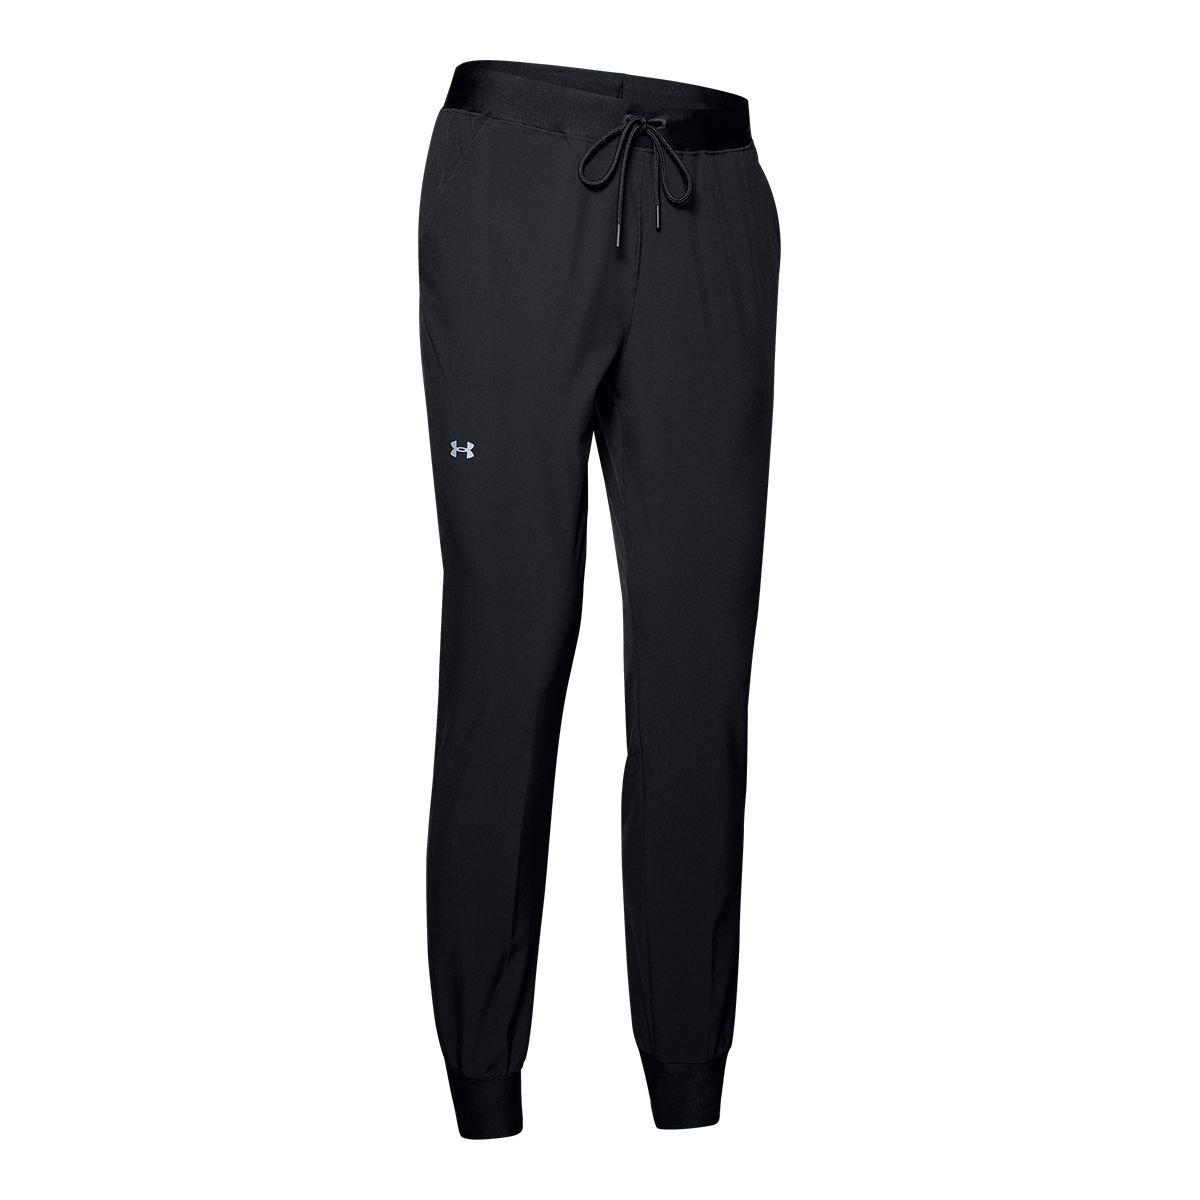 Women Under Armour Workout Pants. SMALL. Hardly - Depop